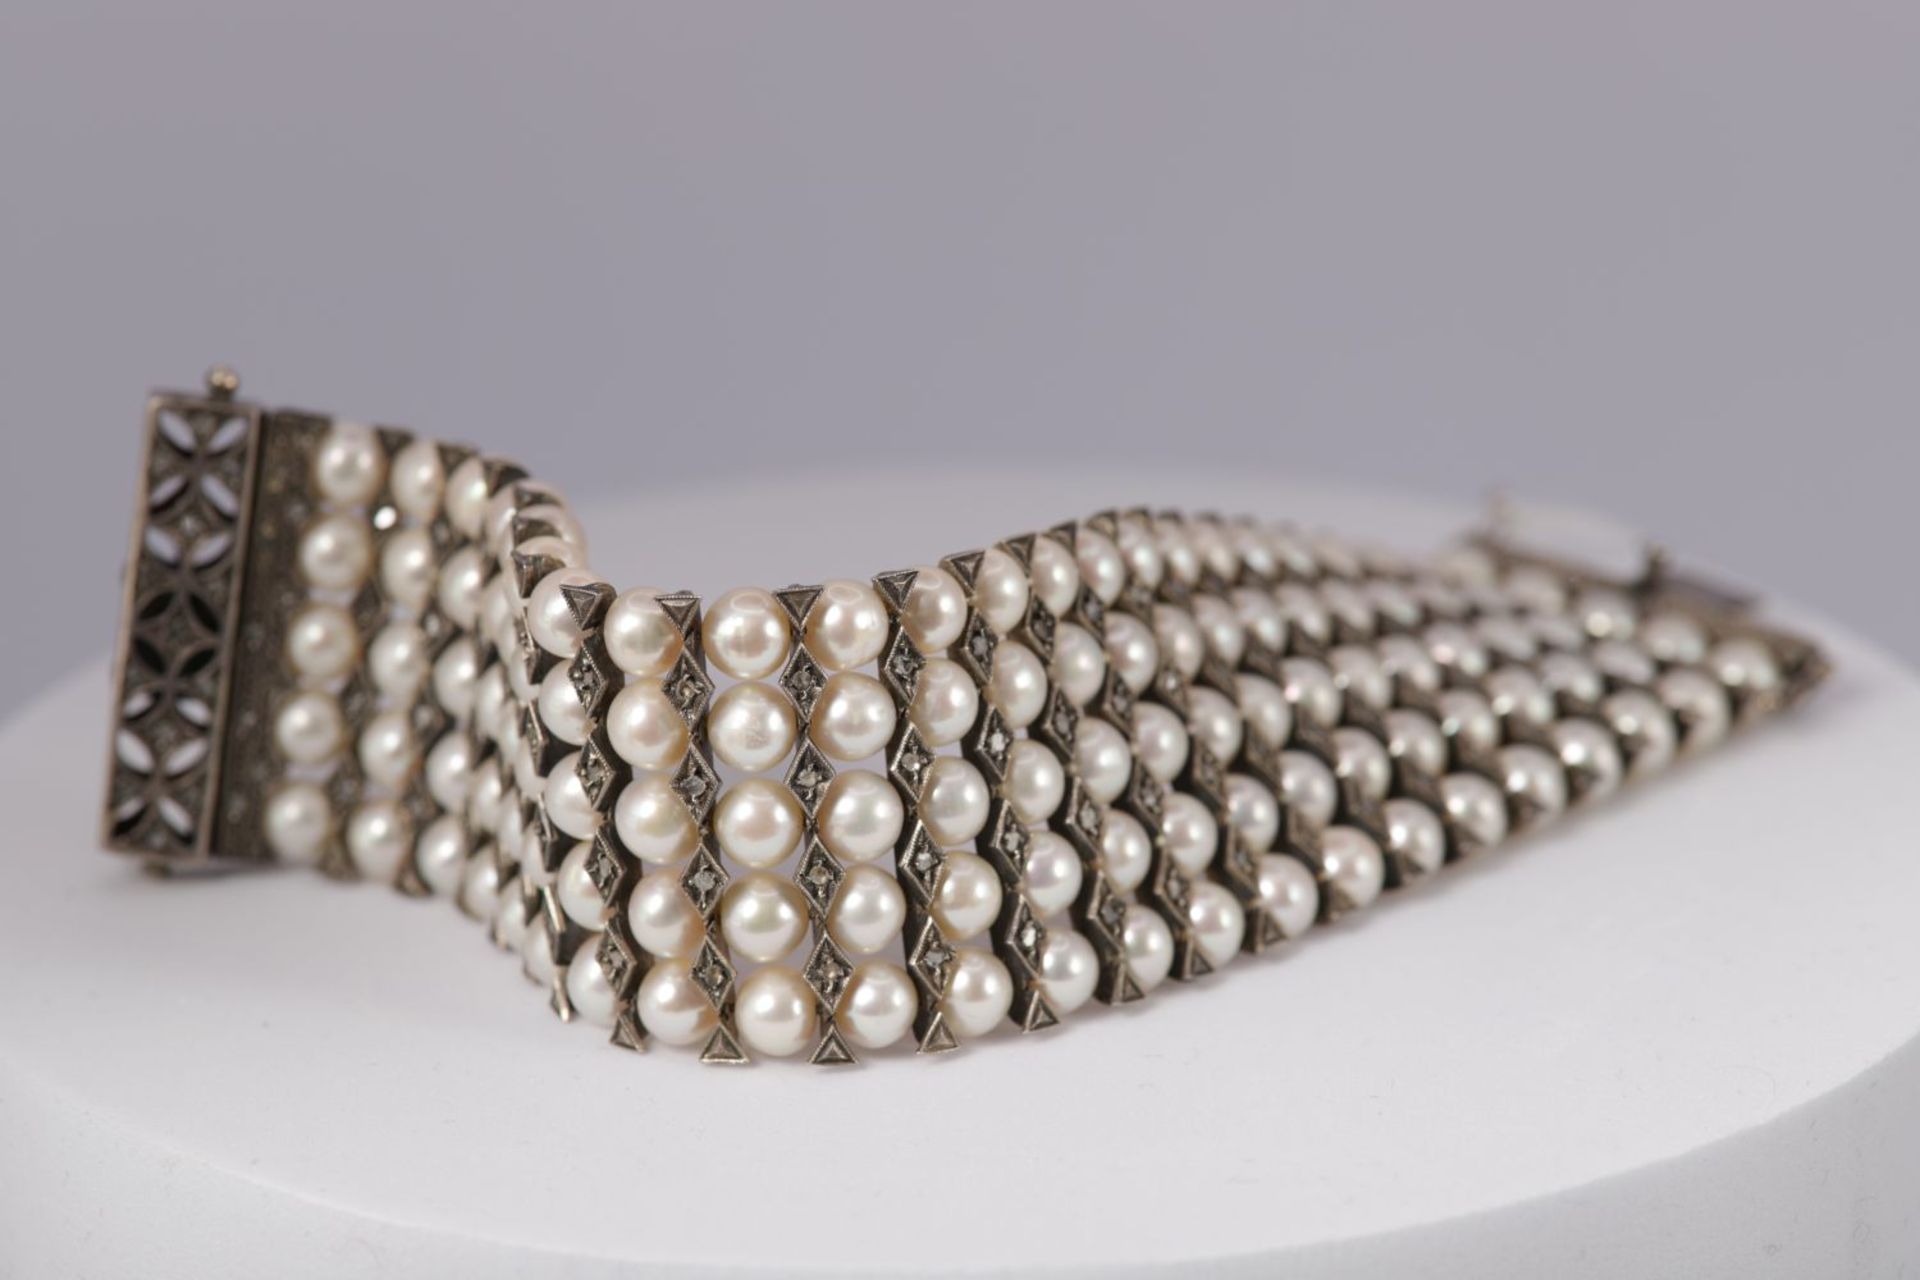 DIAMOND AND PEARL CUFF BRACELET - Image 2 of 3